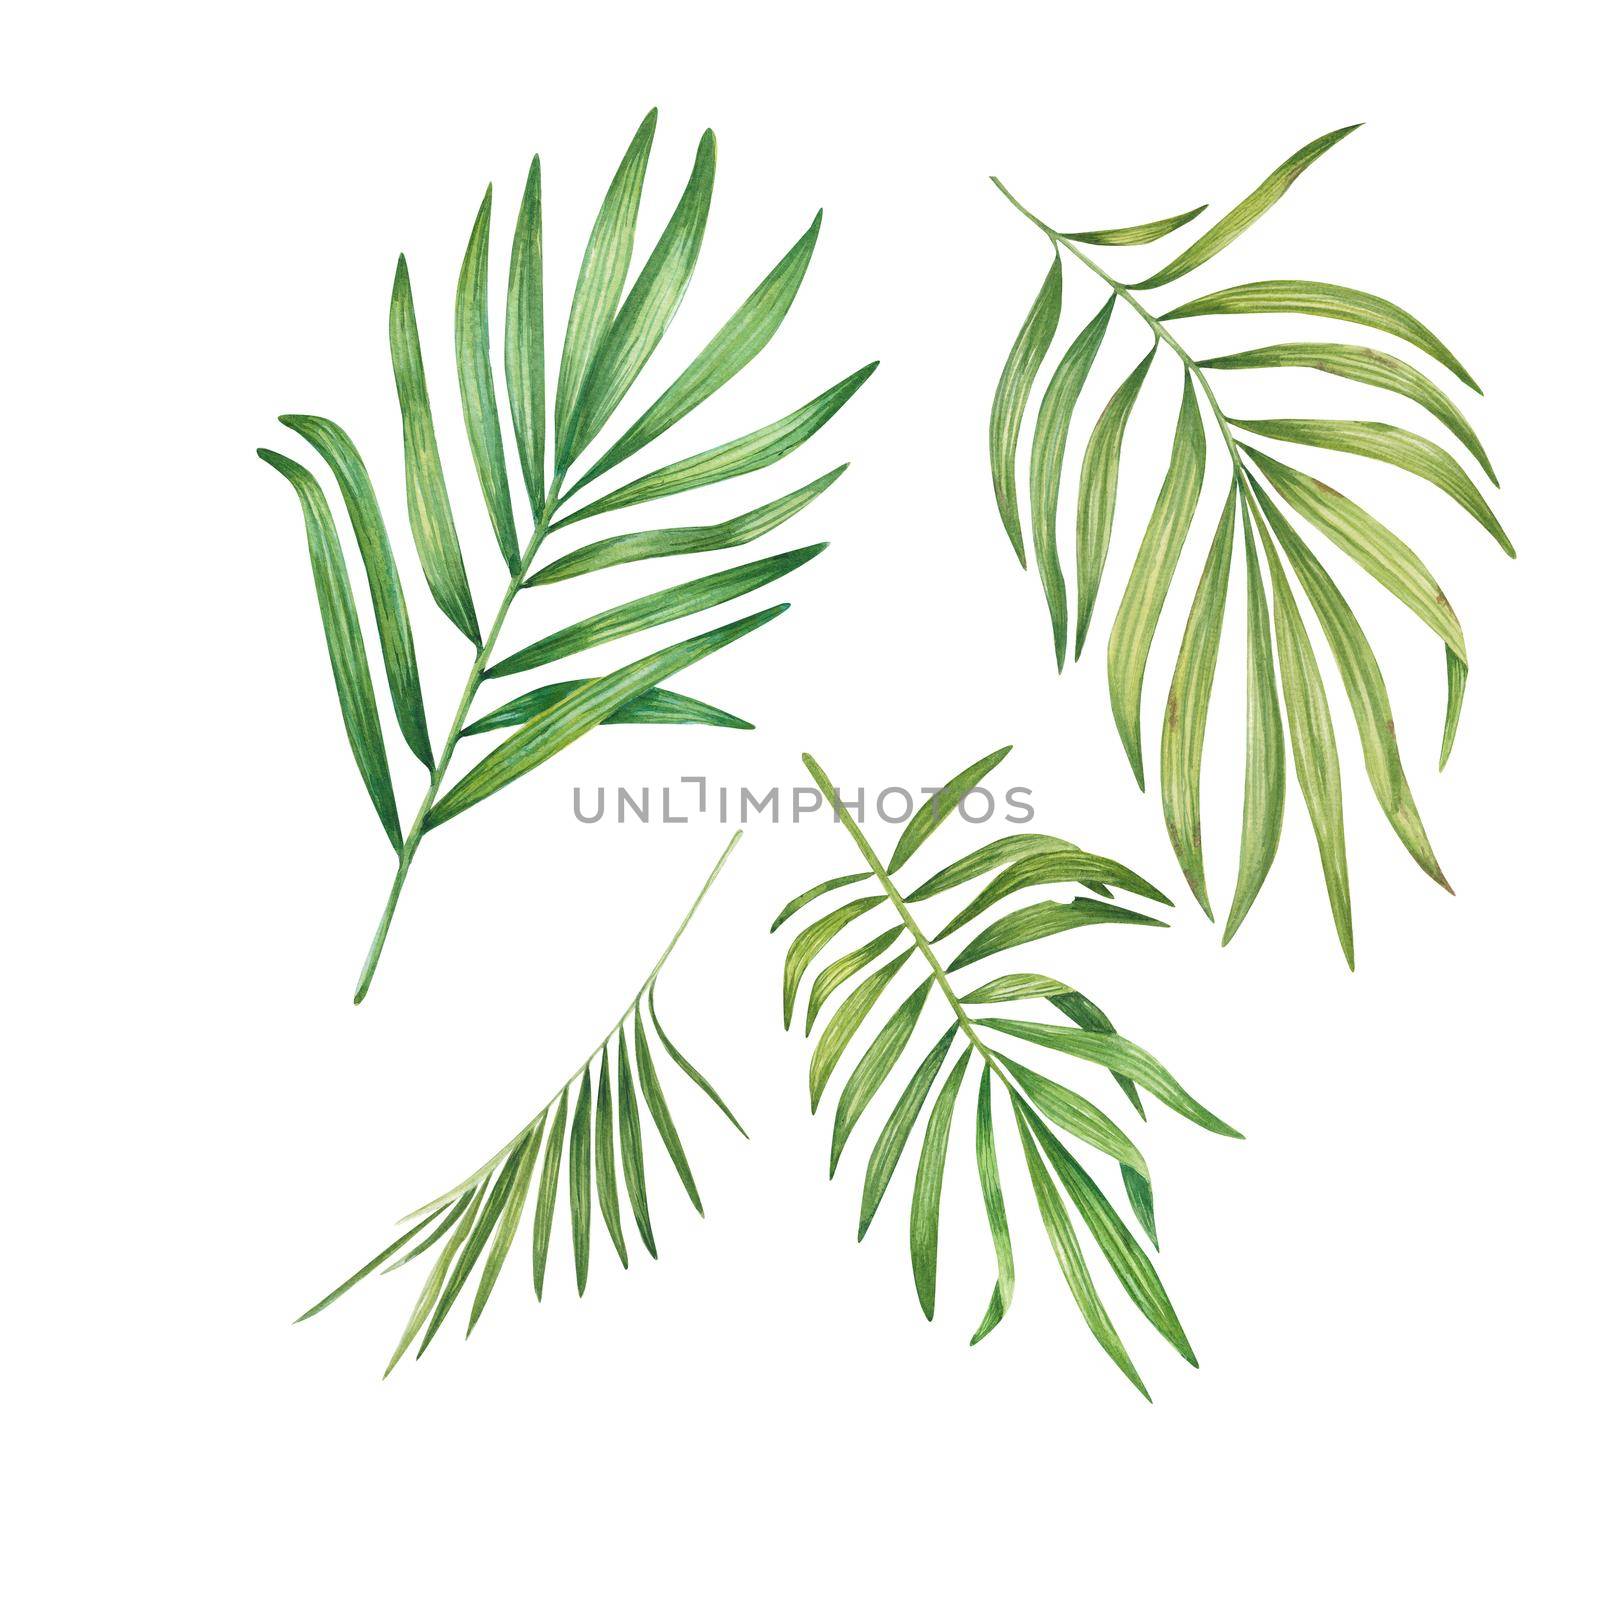 Exotic green plant in watercolor. Tropical leaves, palm leaf, bamboo. Isolated on a white background. Suitable for design, invitations, wallpapers, weddings, packaging. Botanical illustration by NastyaChe